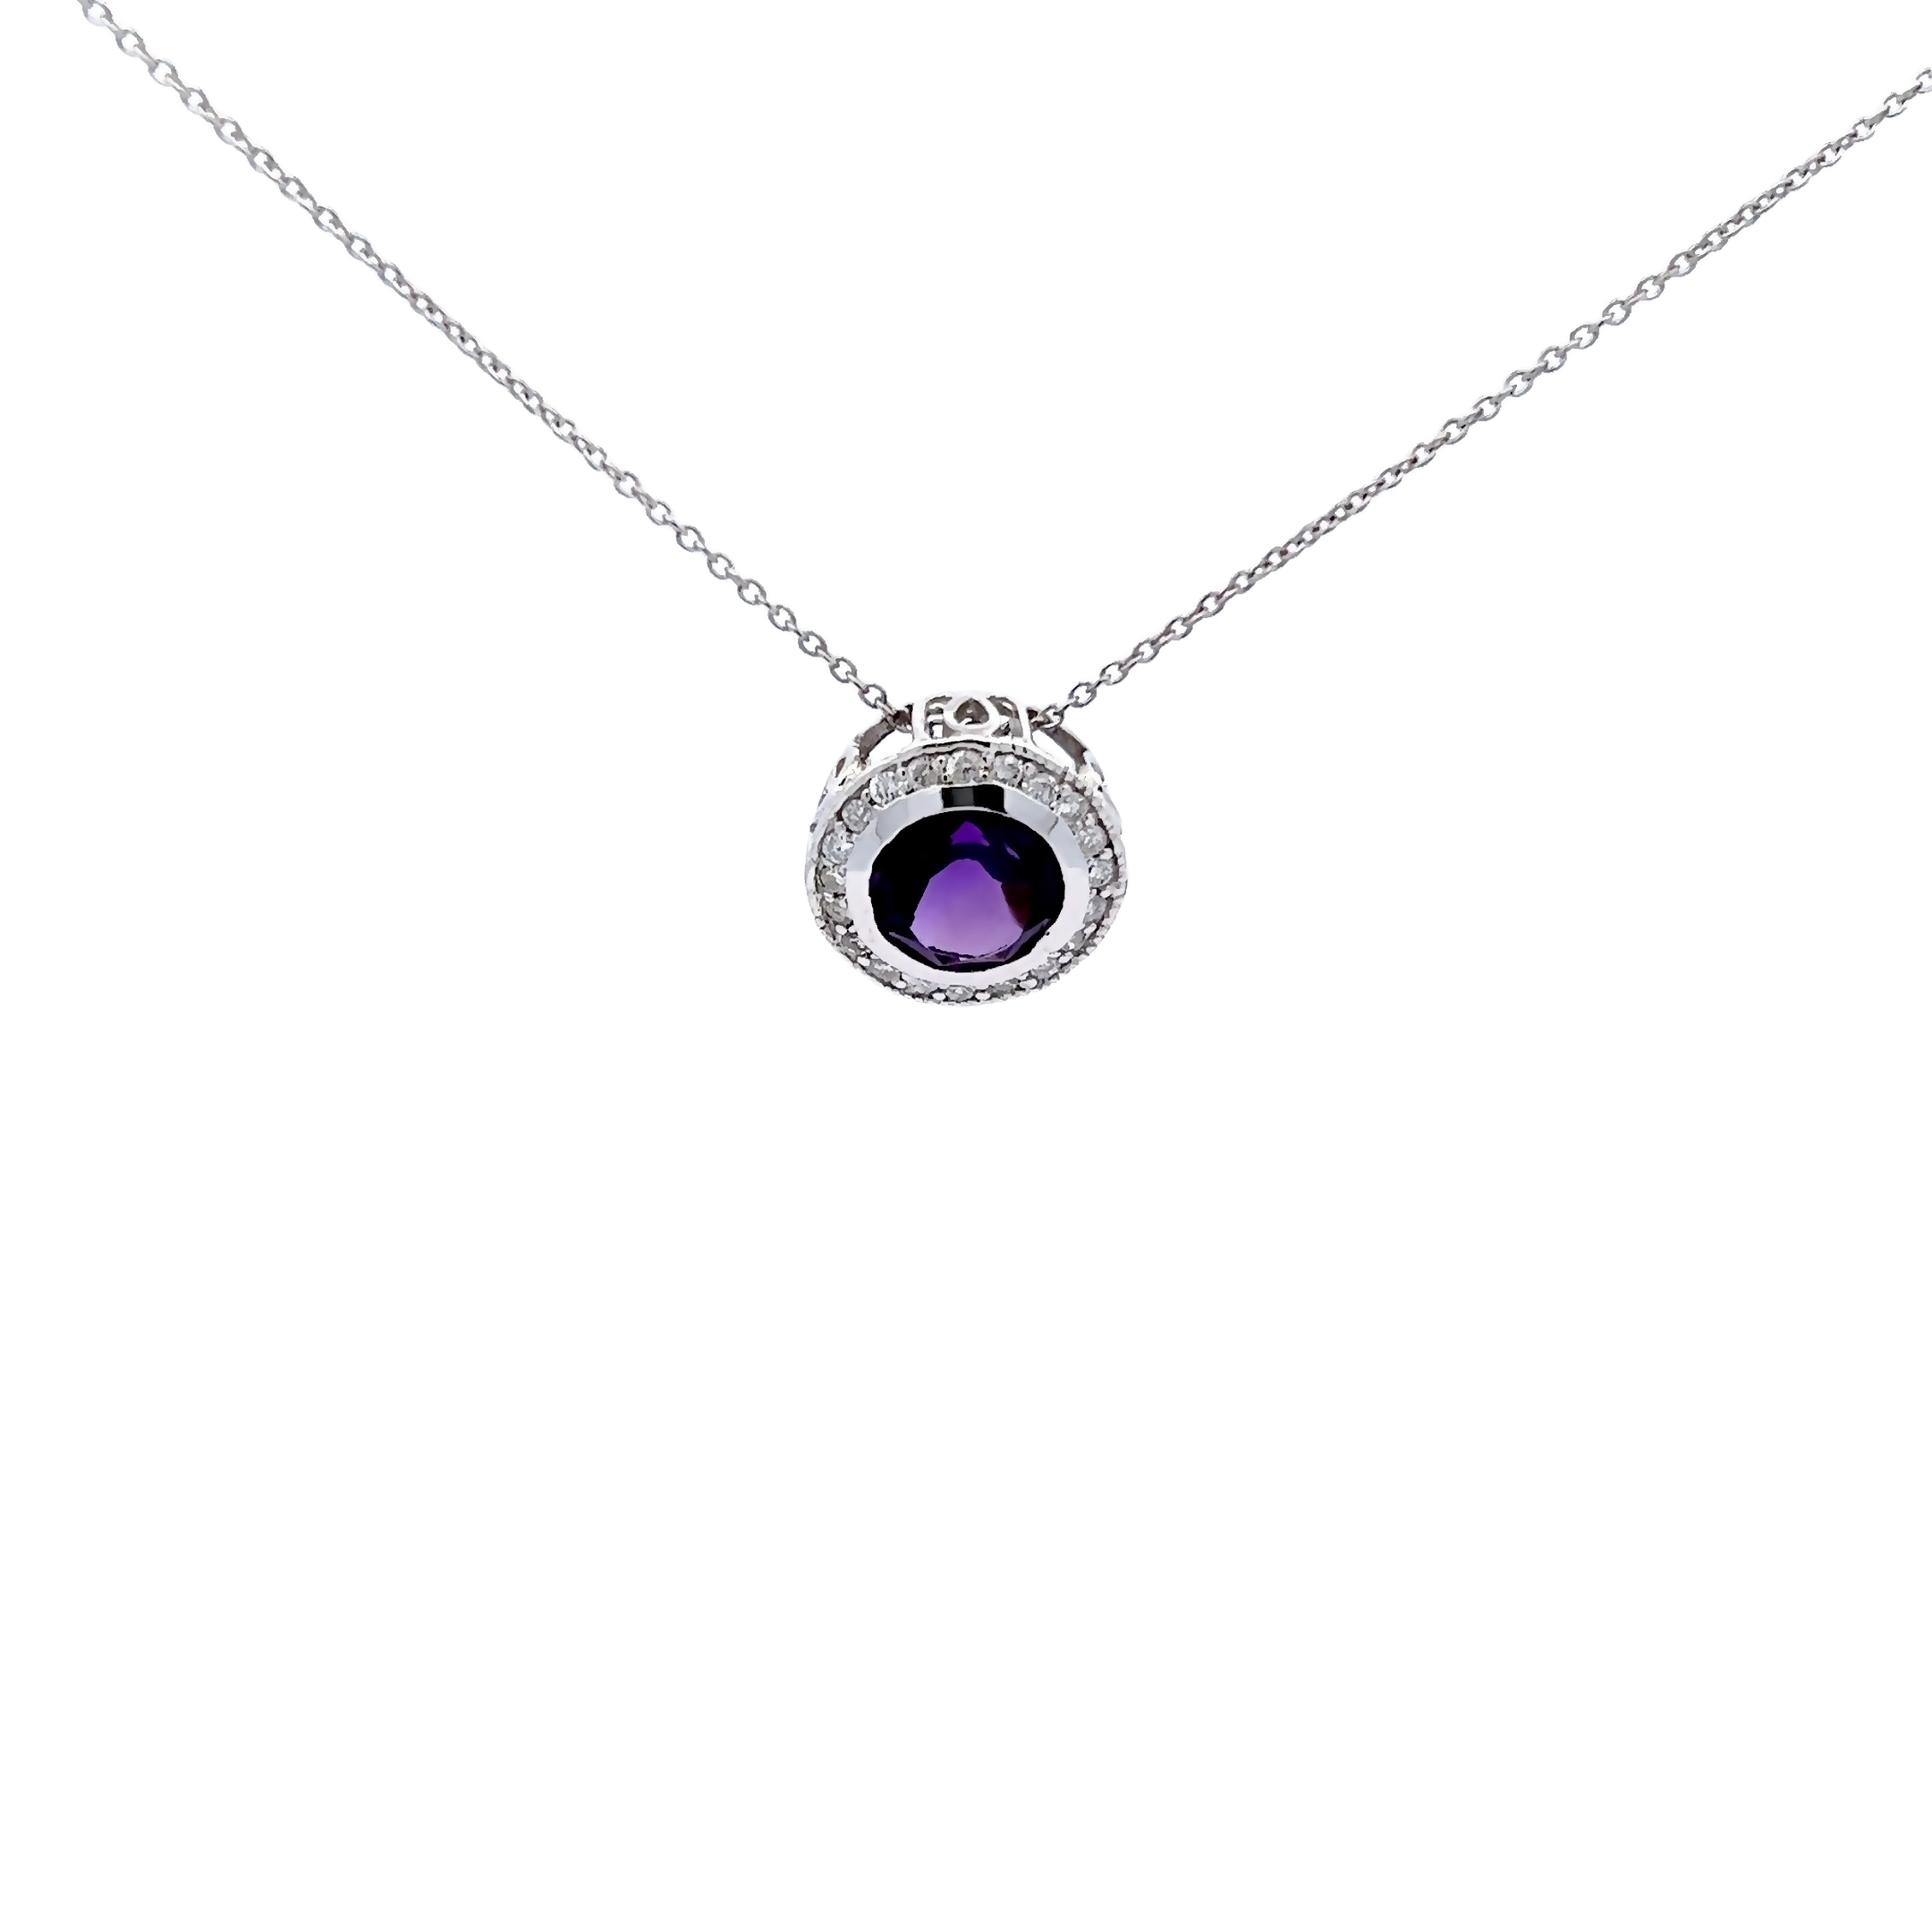 14 karat white gold halo solitaire necklace with One 1.90carat round mixed cut Amethyst and 20=0.25 total weight round brilliant G VS Diamonds